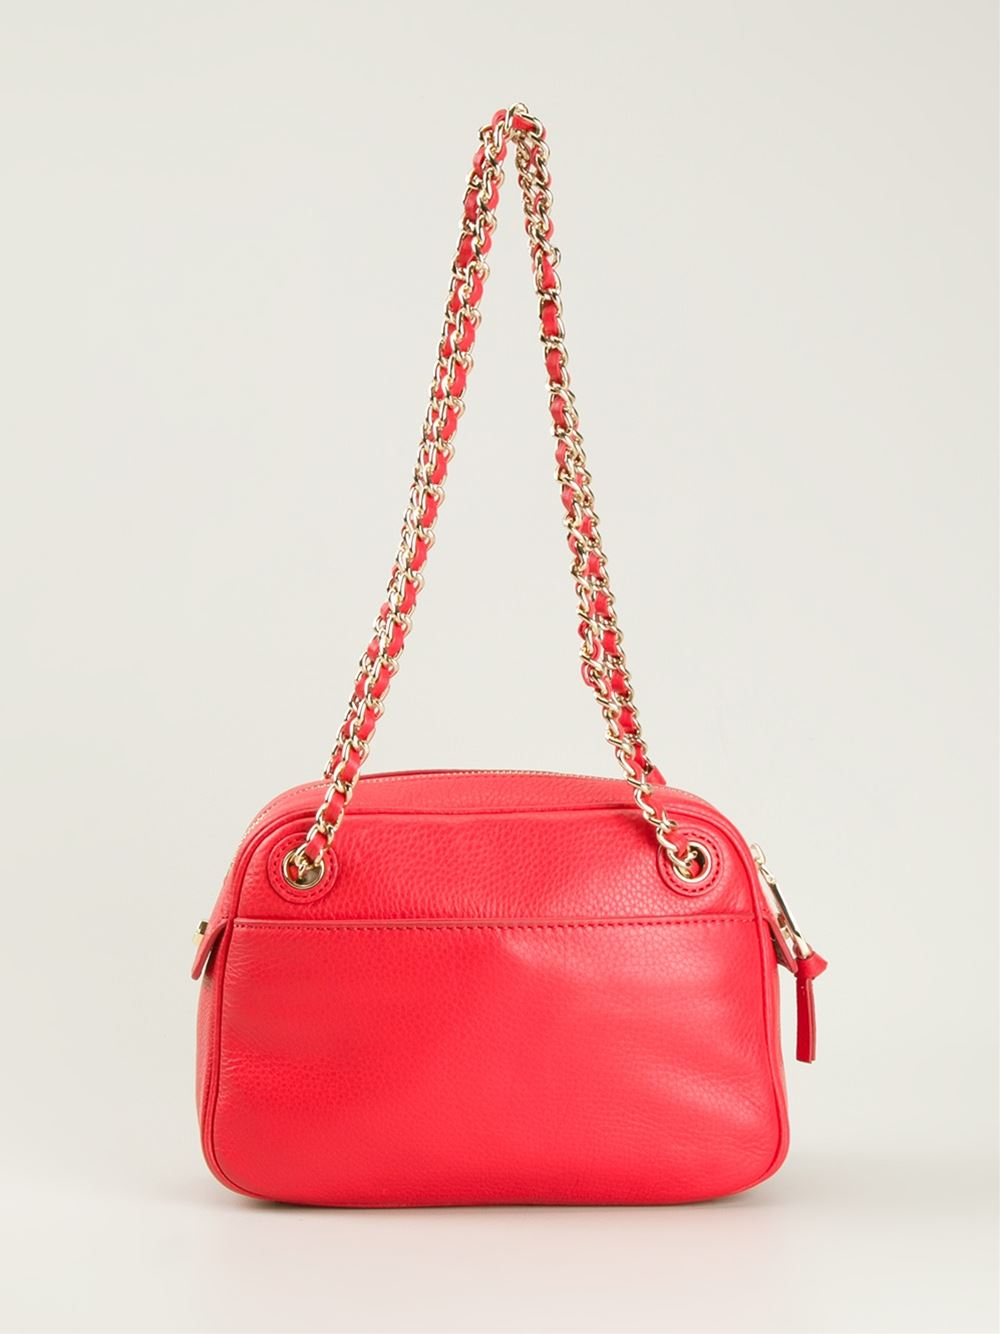 Tory Burch 'Thea' Chain Cross Body Bag in Red - Lyst